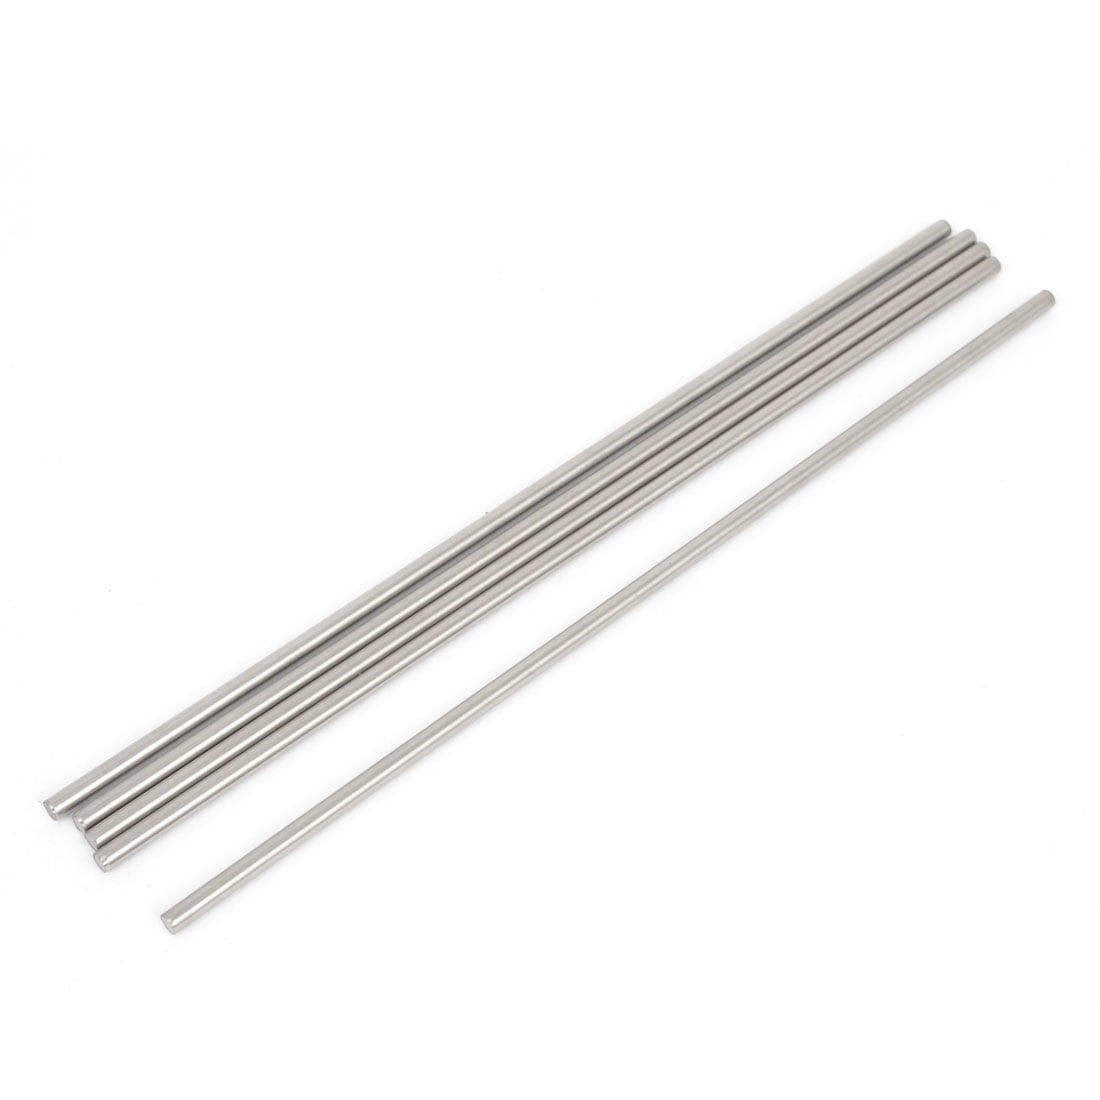 sourcingmap 5Pcs HSS 100mm x 3mm Round Rod Stock for RC Airplane Model 